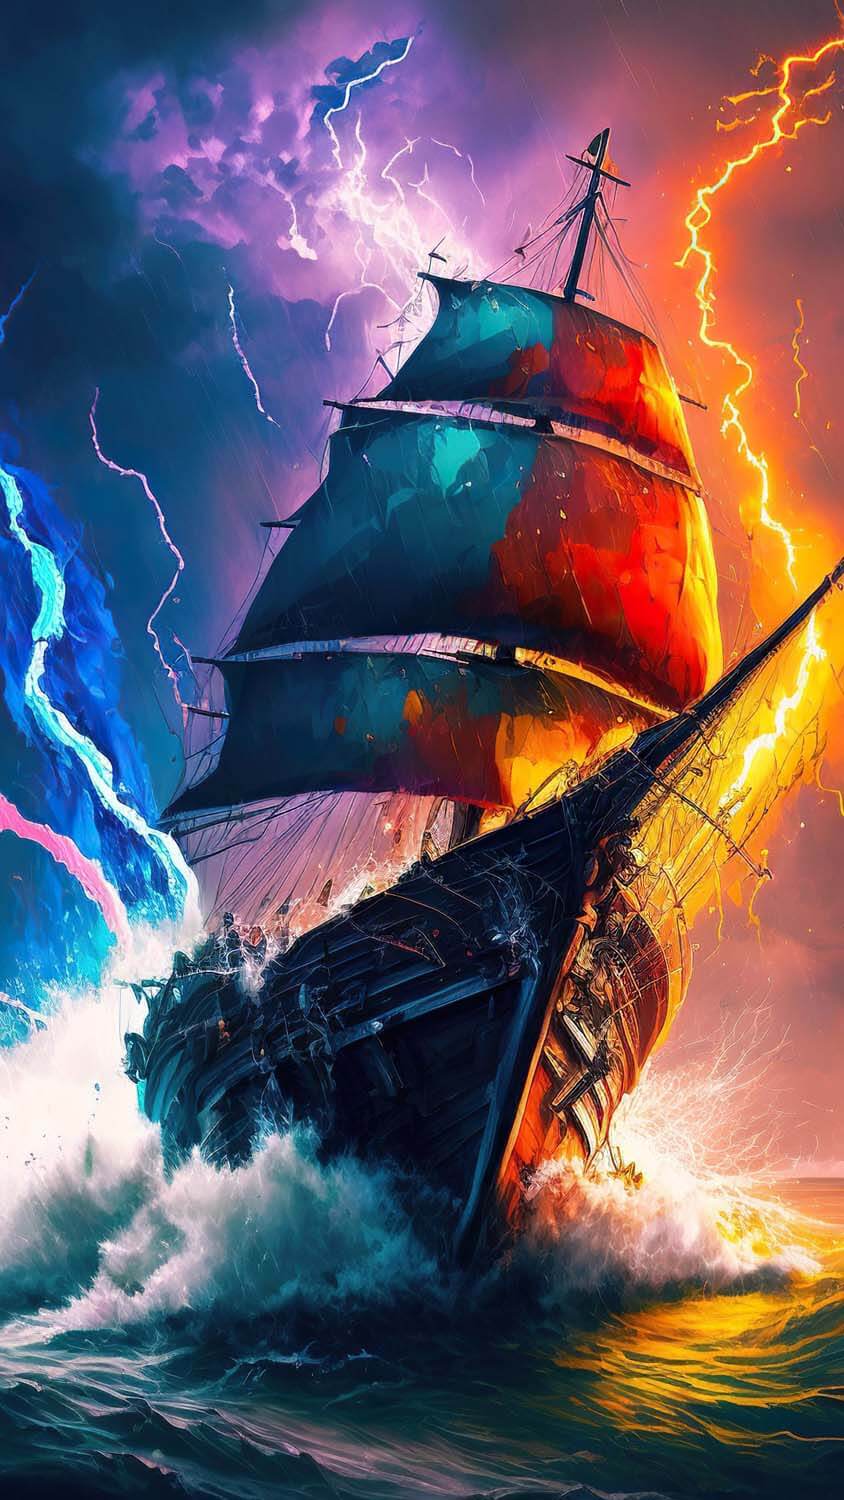 Ship in Storm iPhone Wallpaper HD